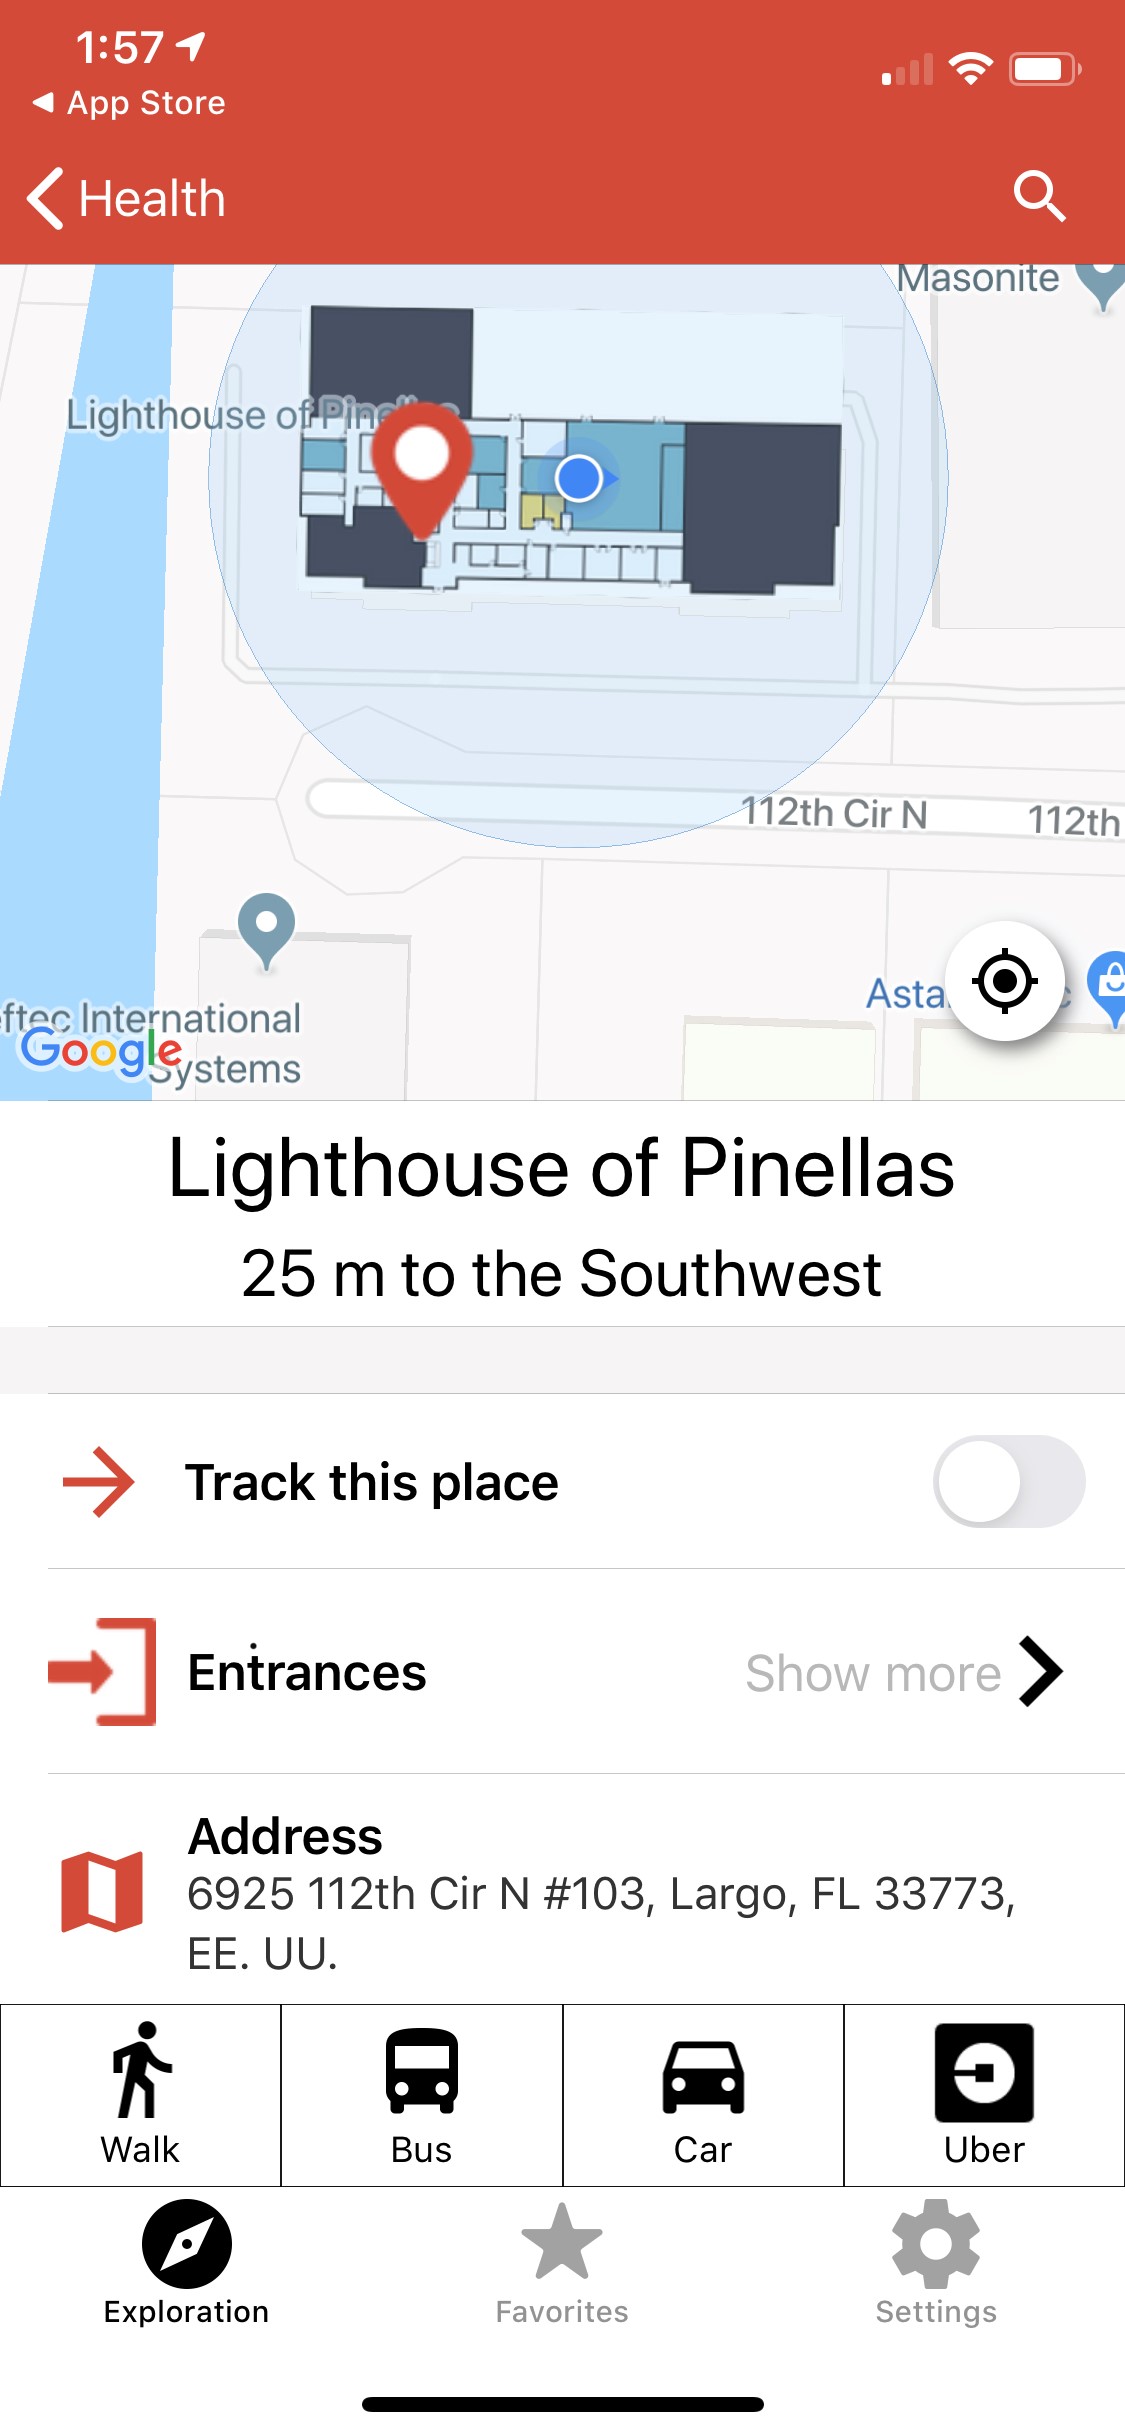 Lazarillo app showing Lighthouse of Pinellas location